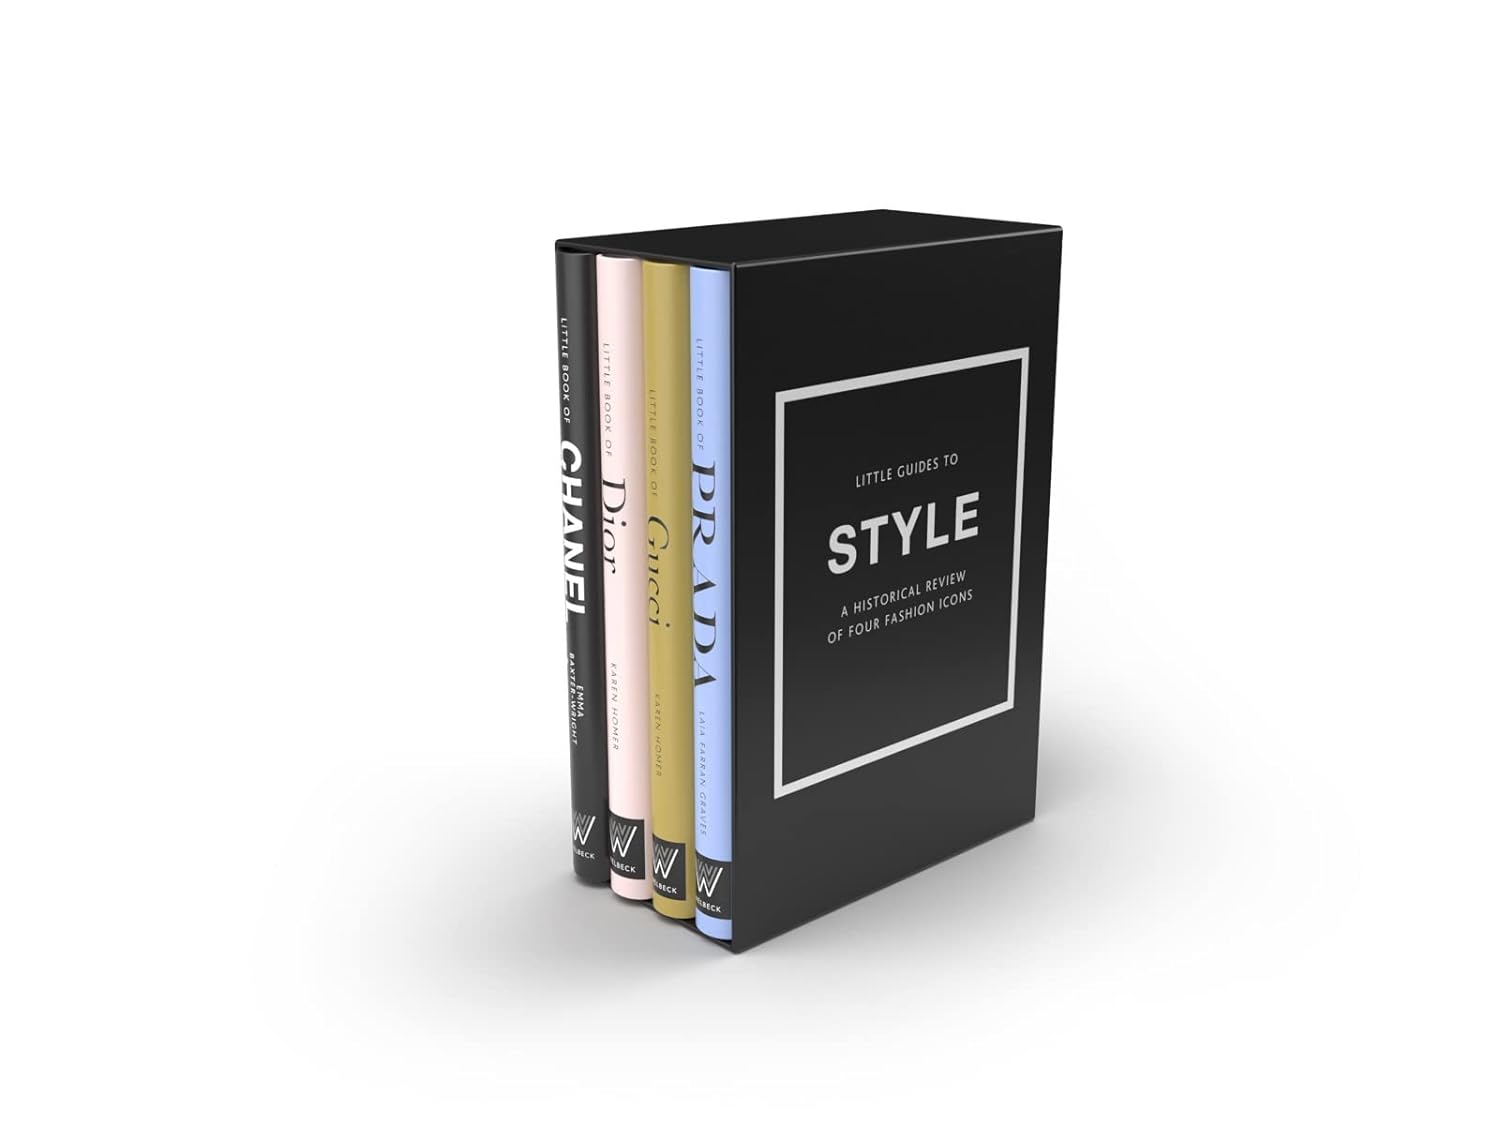 Little Guides to Style: The Story of Four Iconic Fashion Houses by